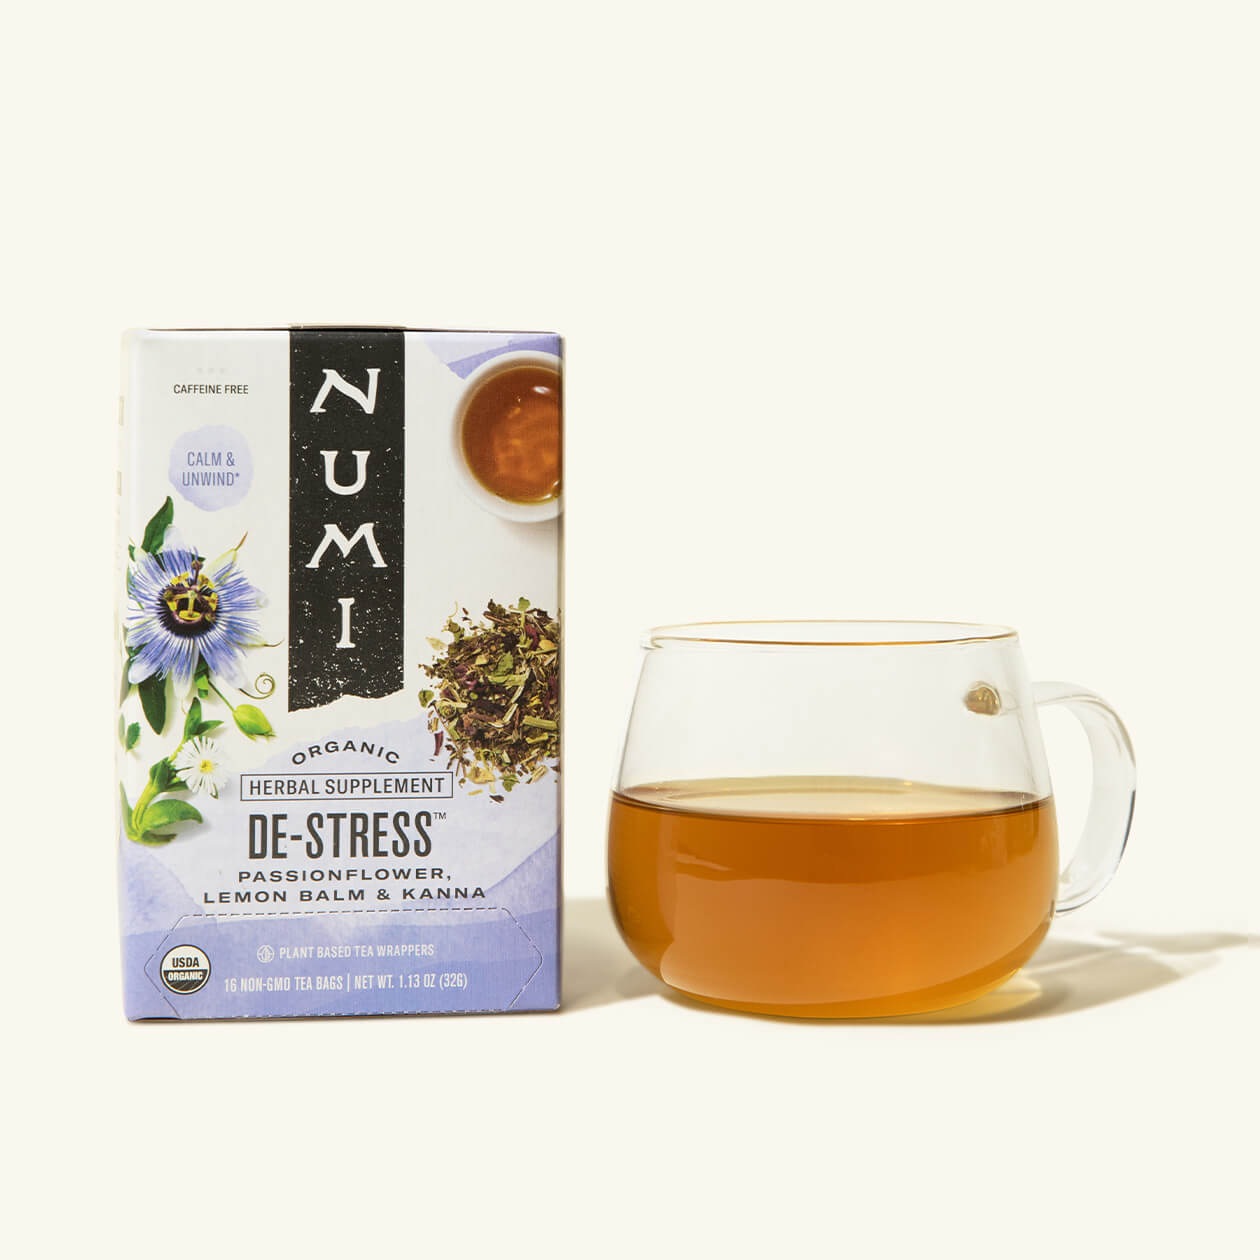 A box of Numi's De-Stress tea next to a brewed cup of tea in a clear cup